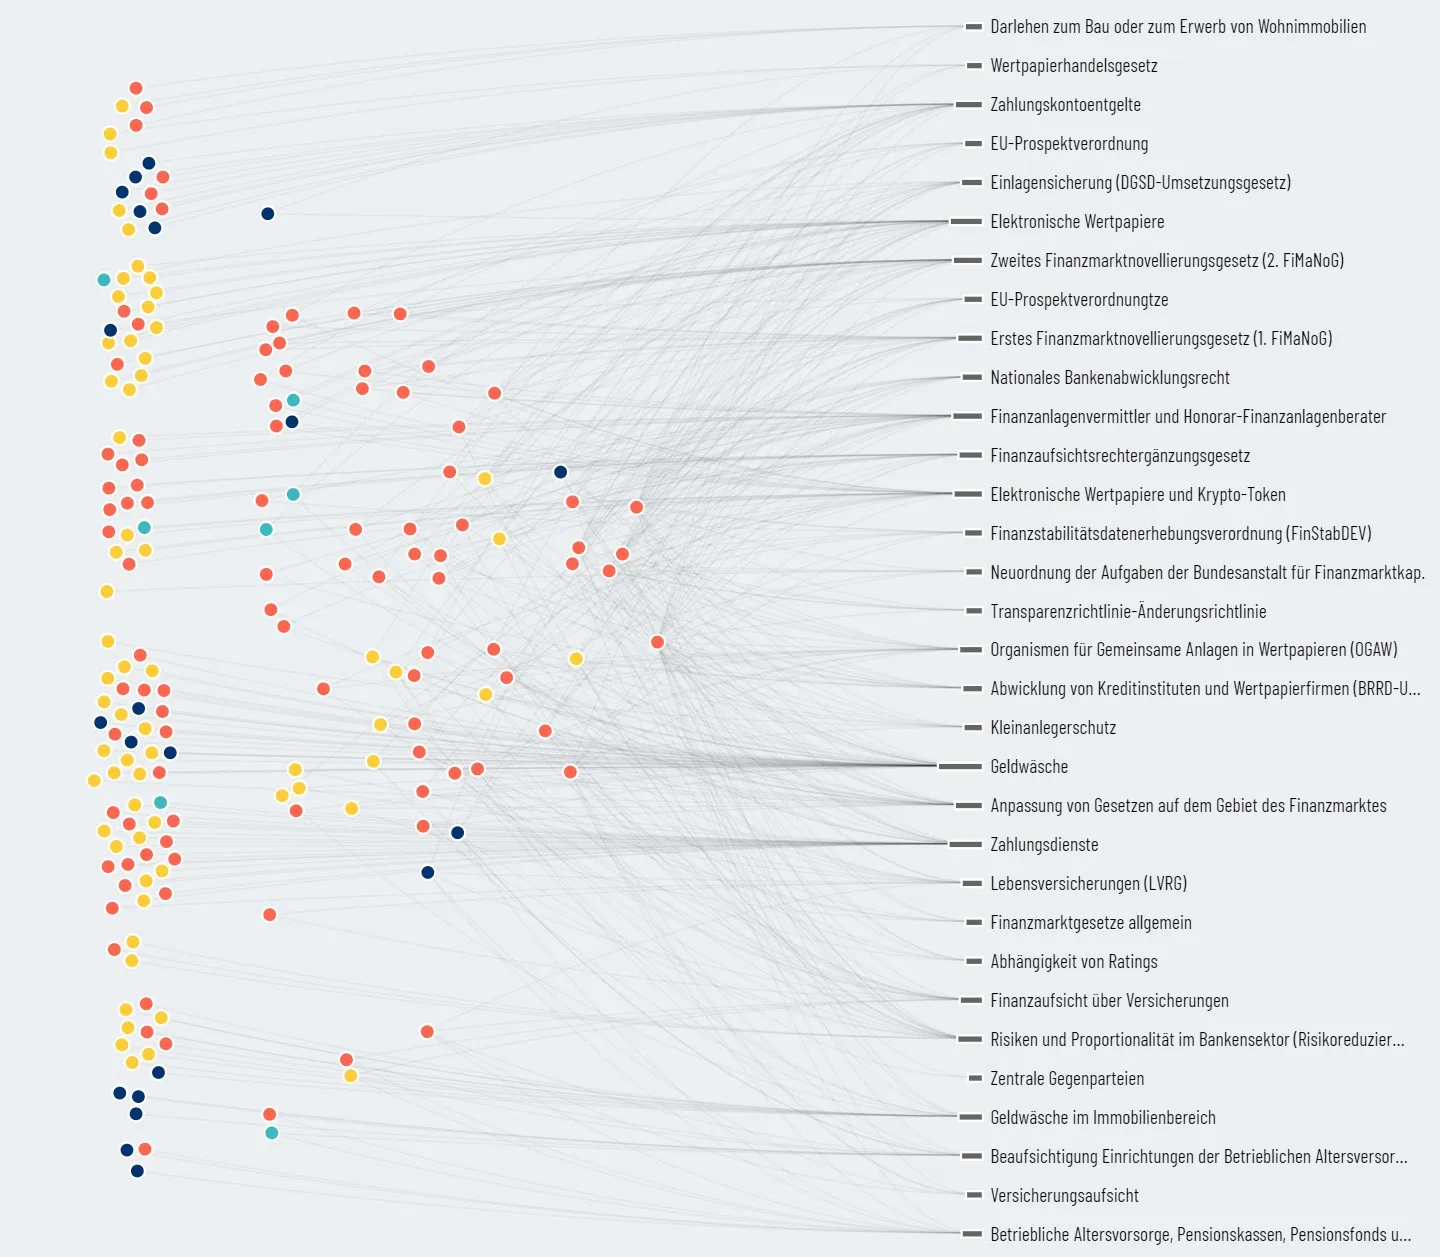 Visualizations of the lobby report from Finanzwende.